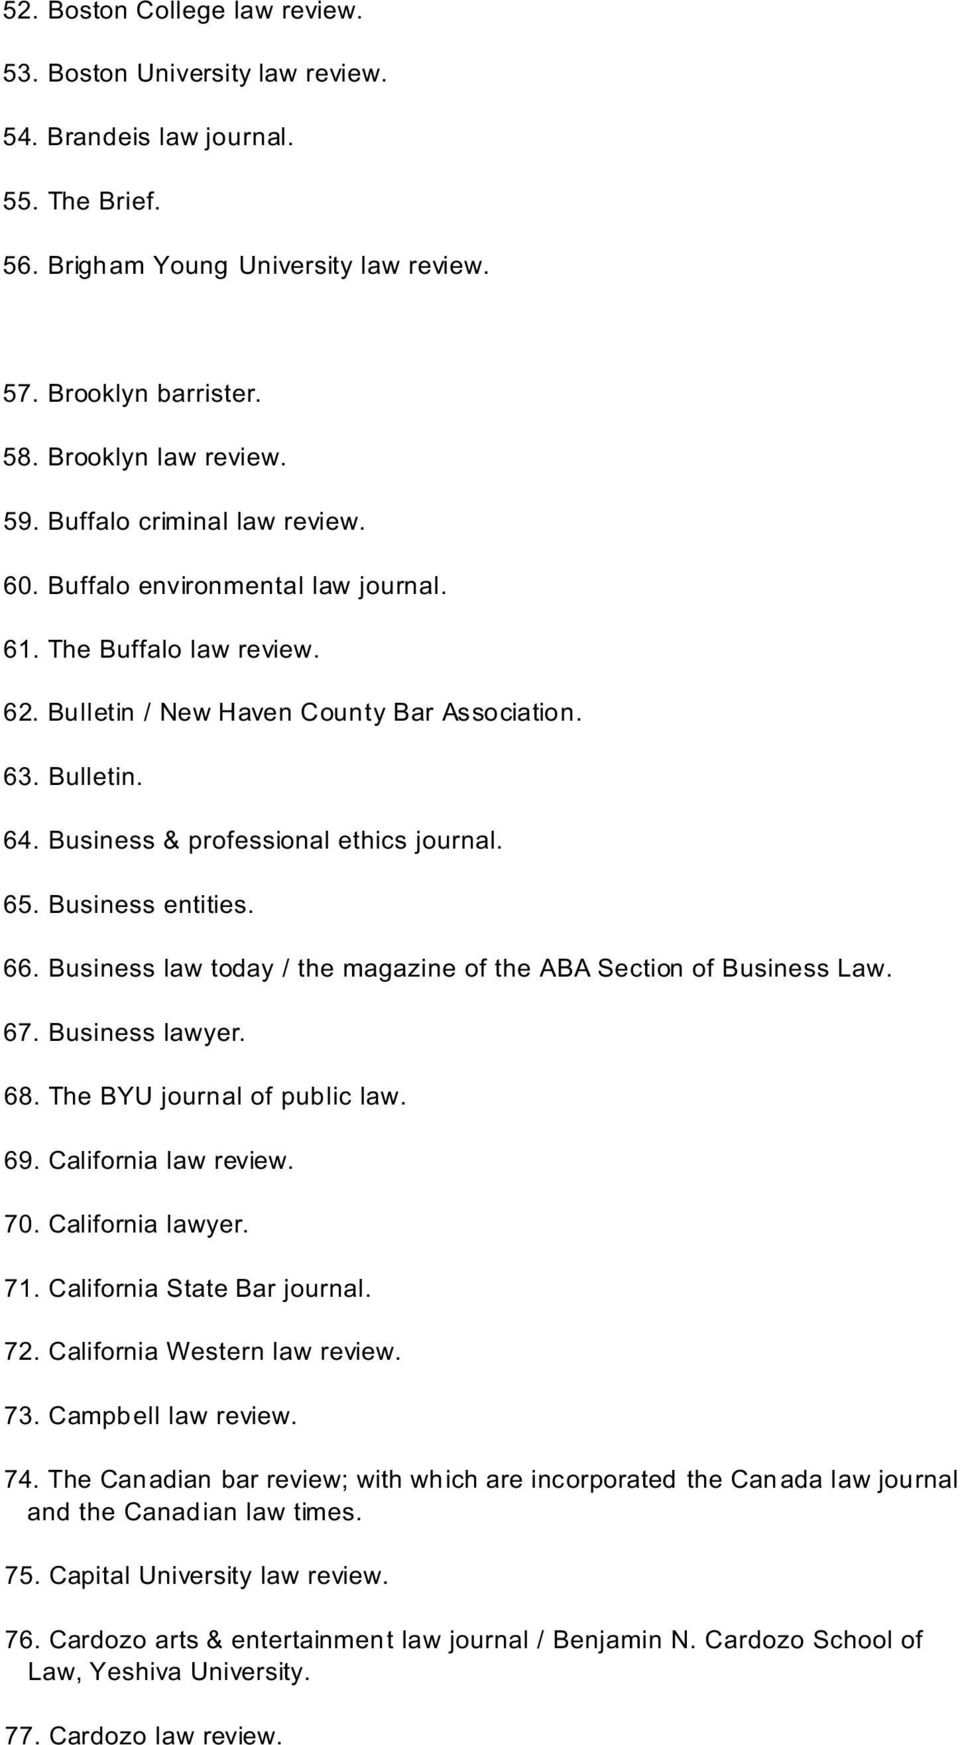 Business & professional ethics journal. 65. Business entities. 66. Business law today / the magazine of the ABA Section of Business Law. 67. Business lawyer. 68. The BYU journal of public law. 69.